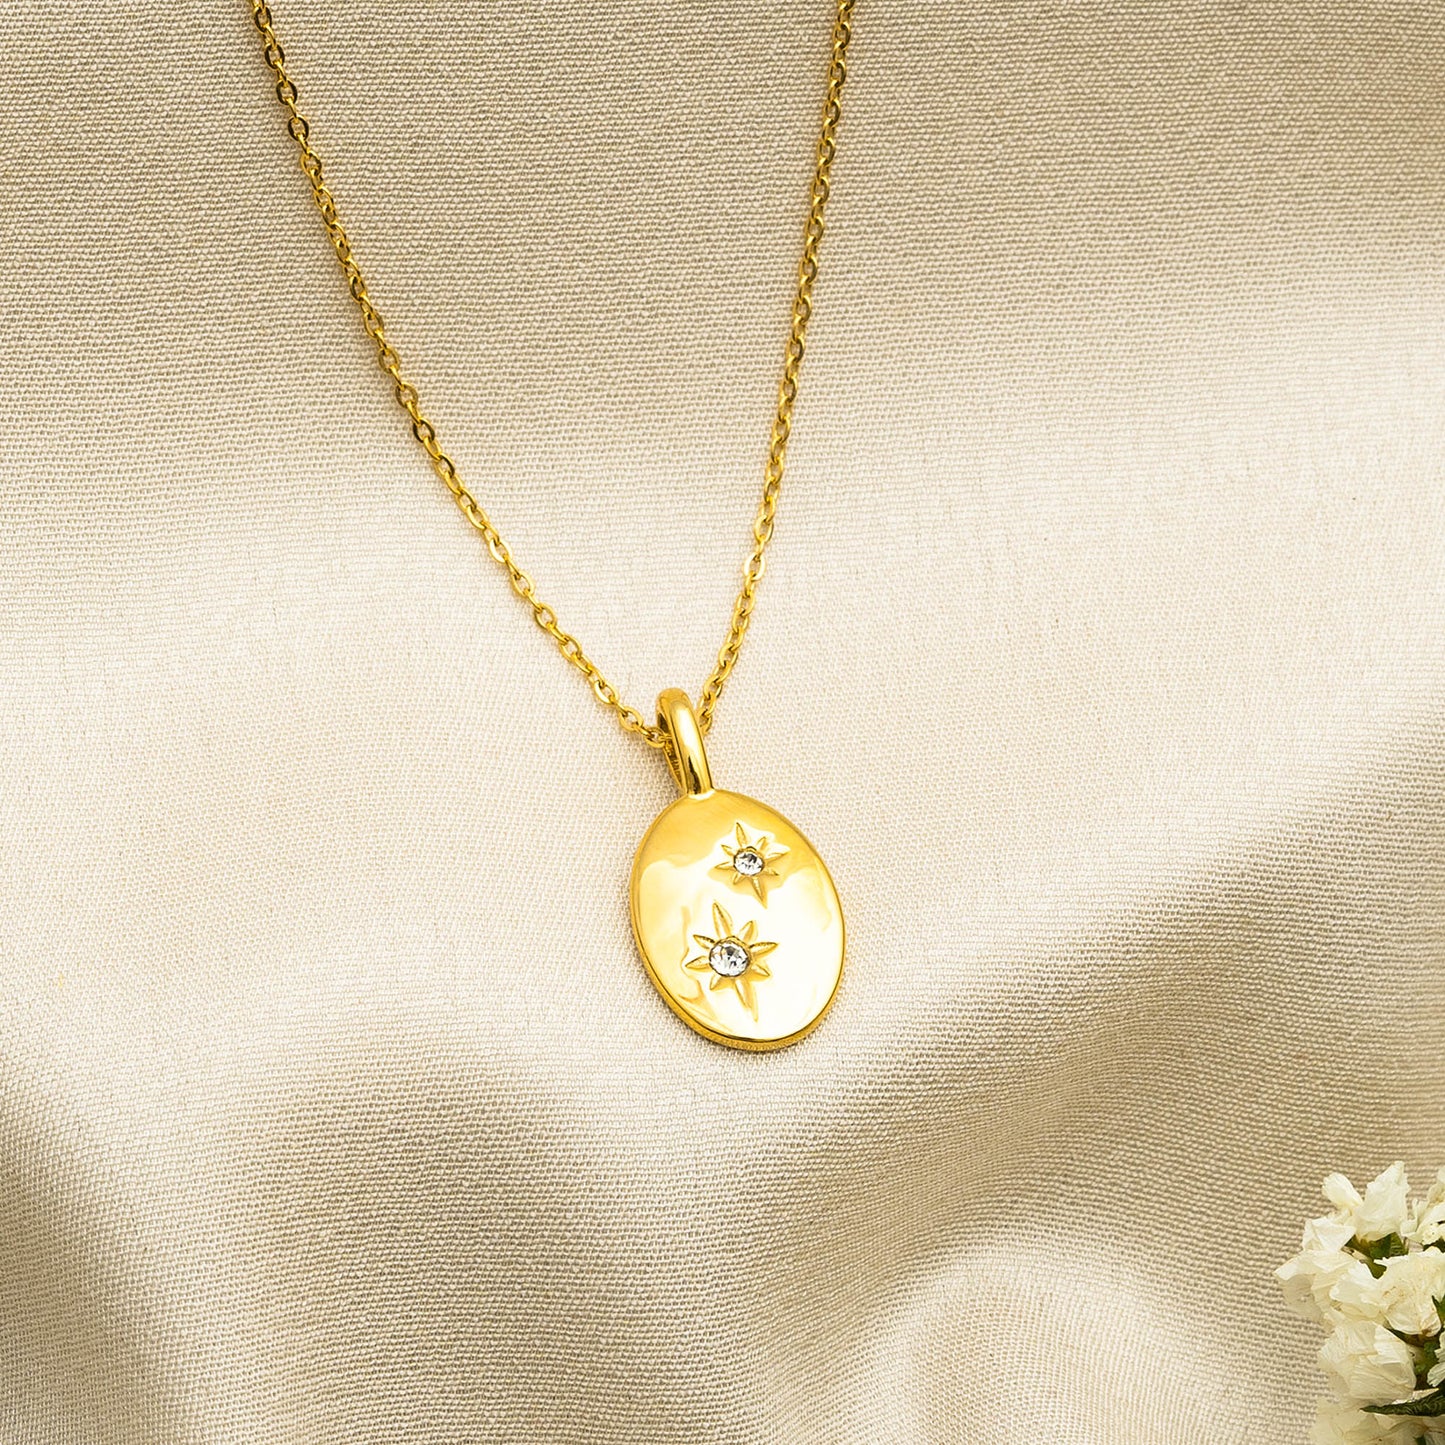 Oval Shape Pendant with Stars